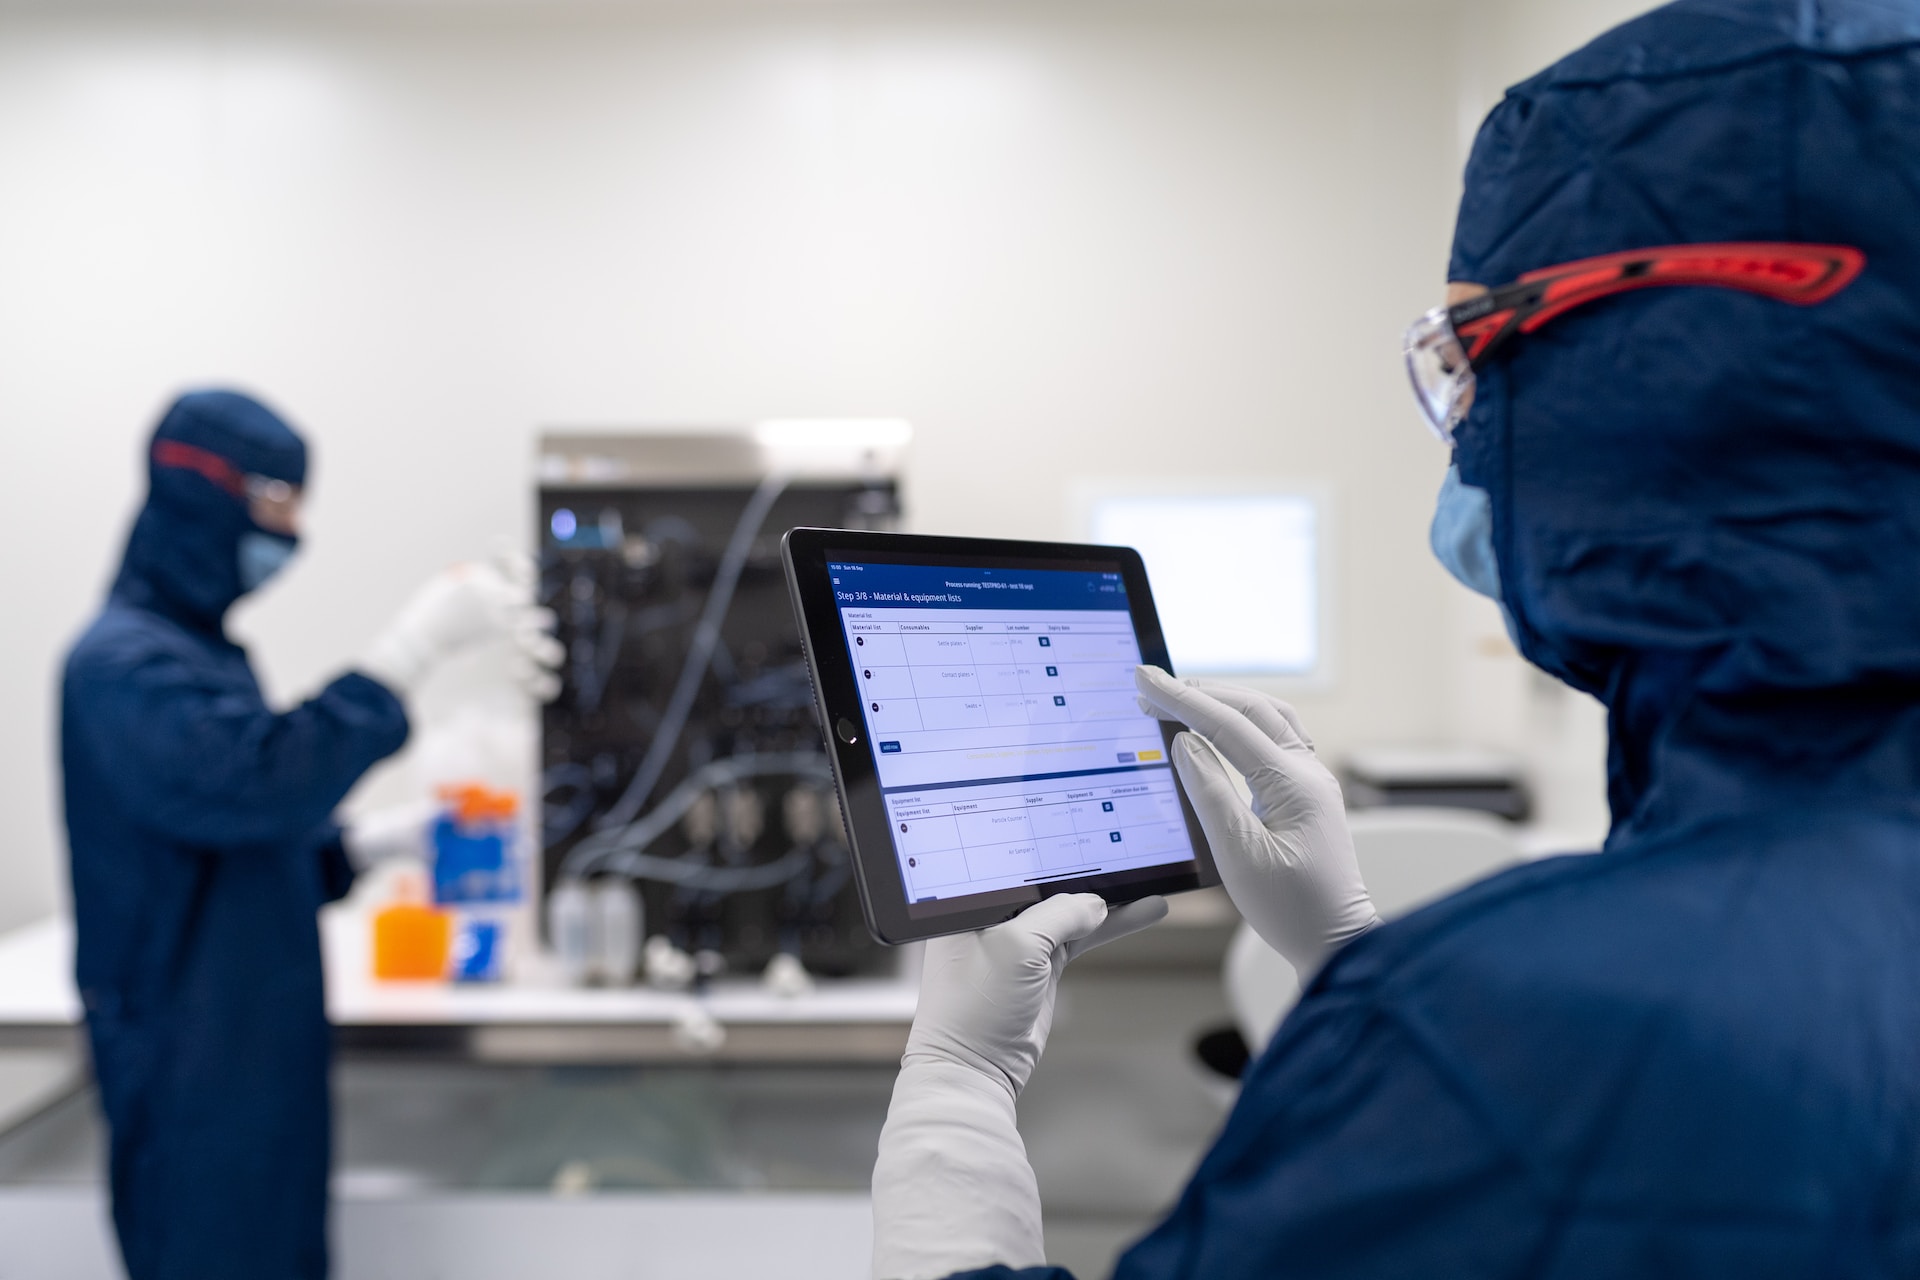 How to Choose the Right Cleanroom Monitor for Your Needs